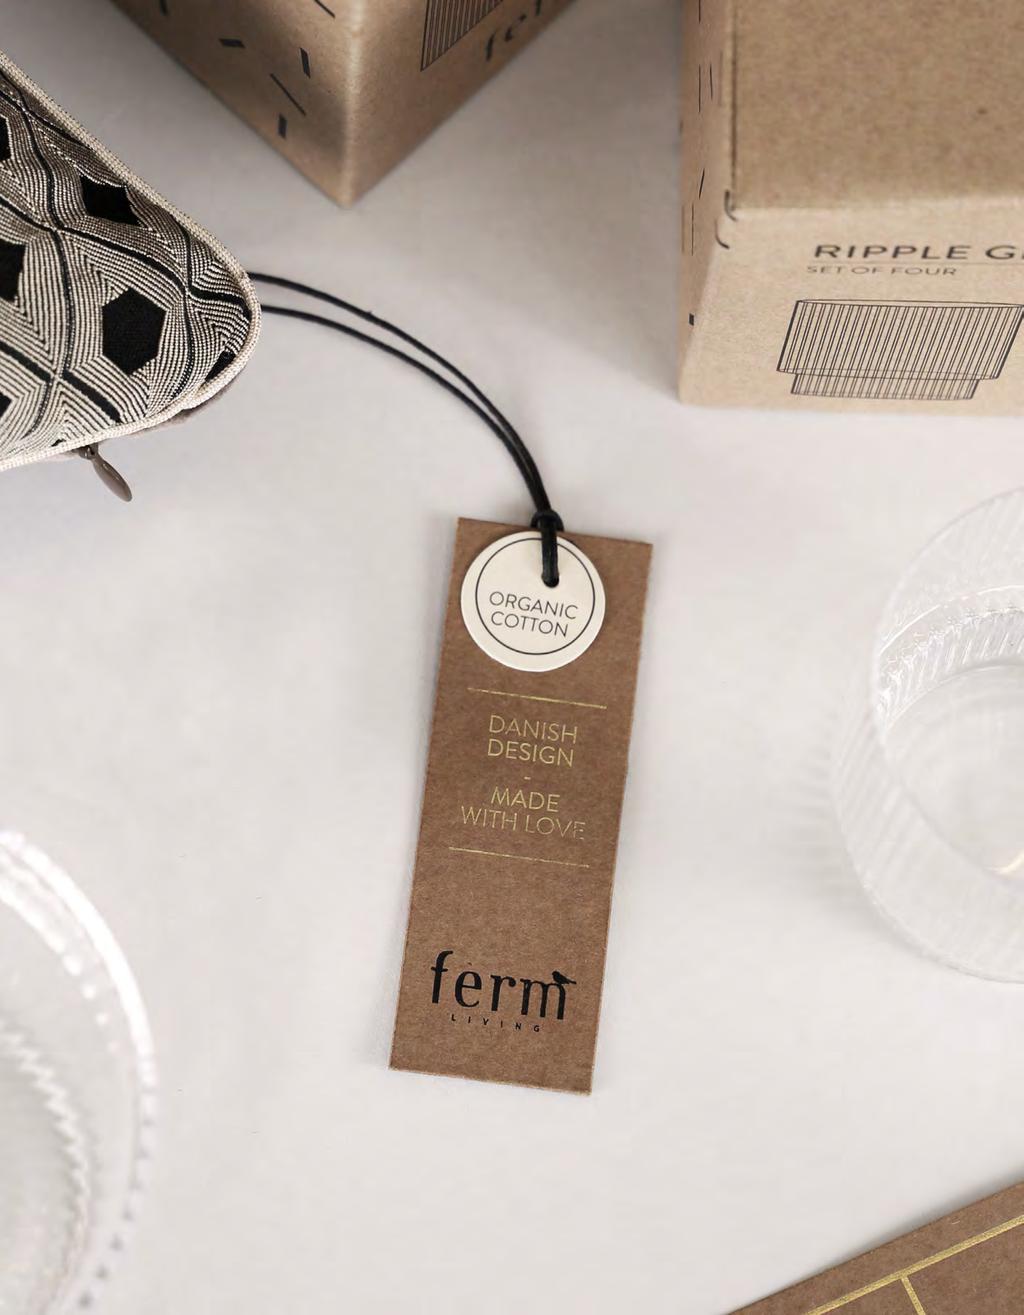 We believe in first impressions, which is why we give our packaging, care labels and hangtags a special touch.